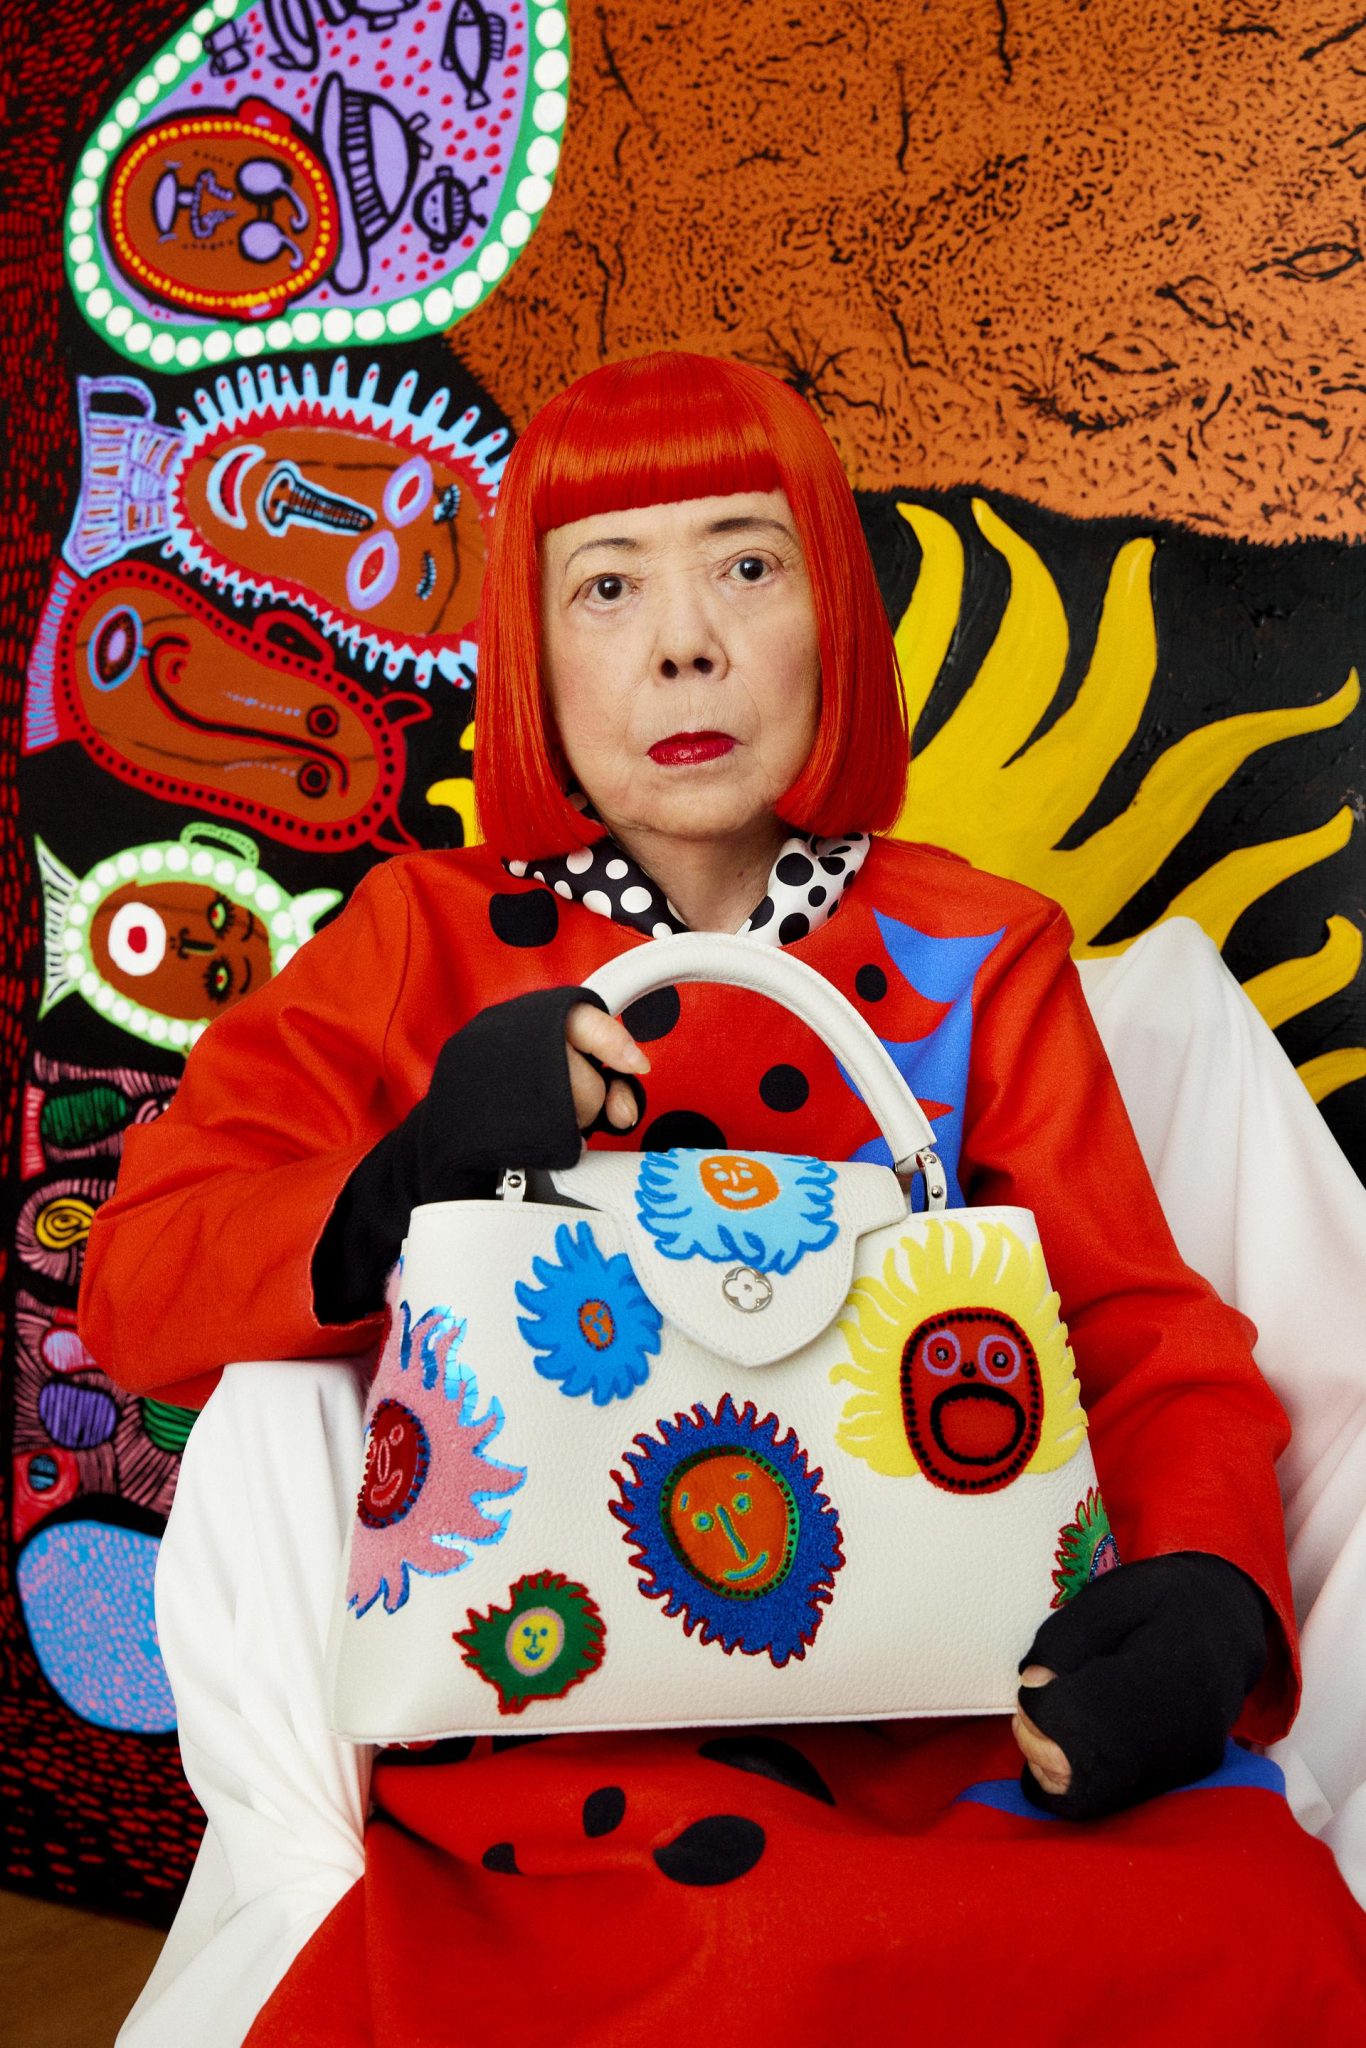 Yayoi Kusama and Louis Vuitton have joined hands for an exclusive